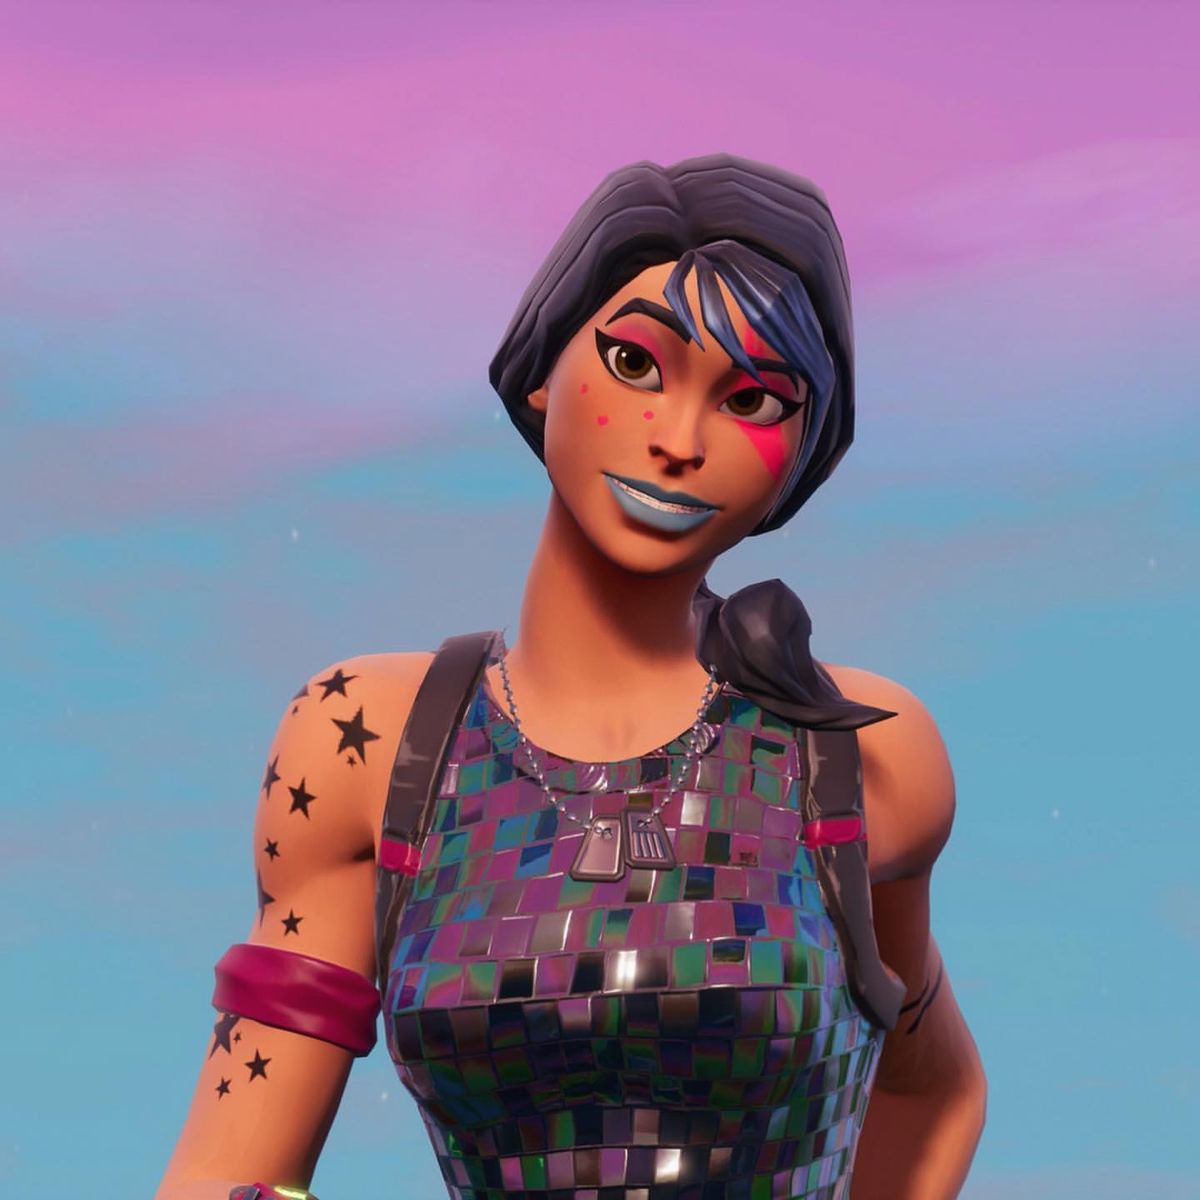 Sparkle Specialist Fortnite Wallpapers